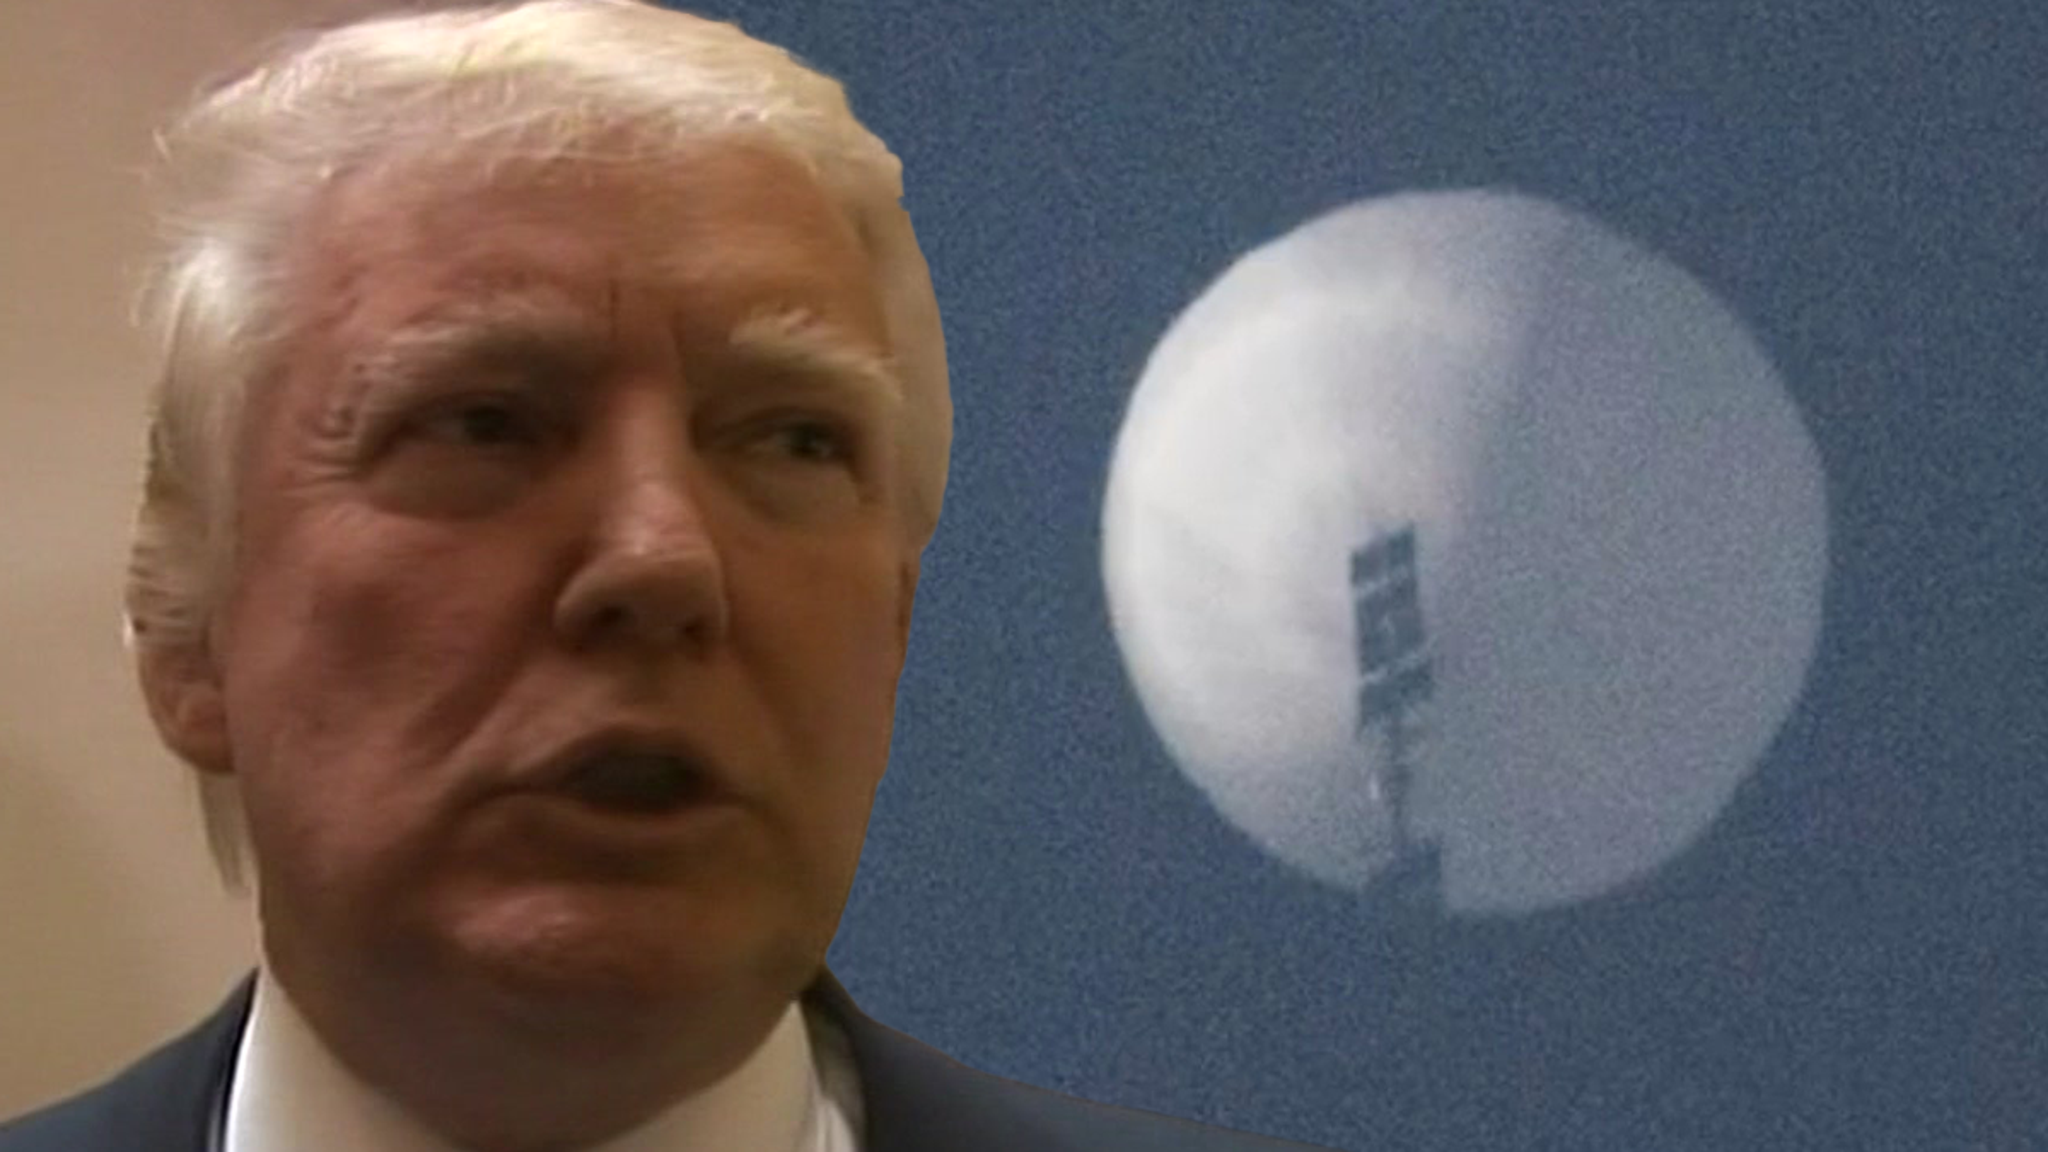 Ex-Trump Officials Refute DoD Claim That 3 Chinese Balloons Flew Here Before